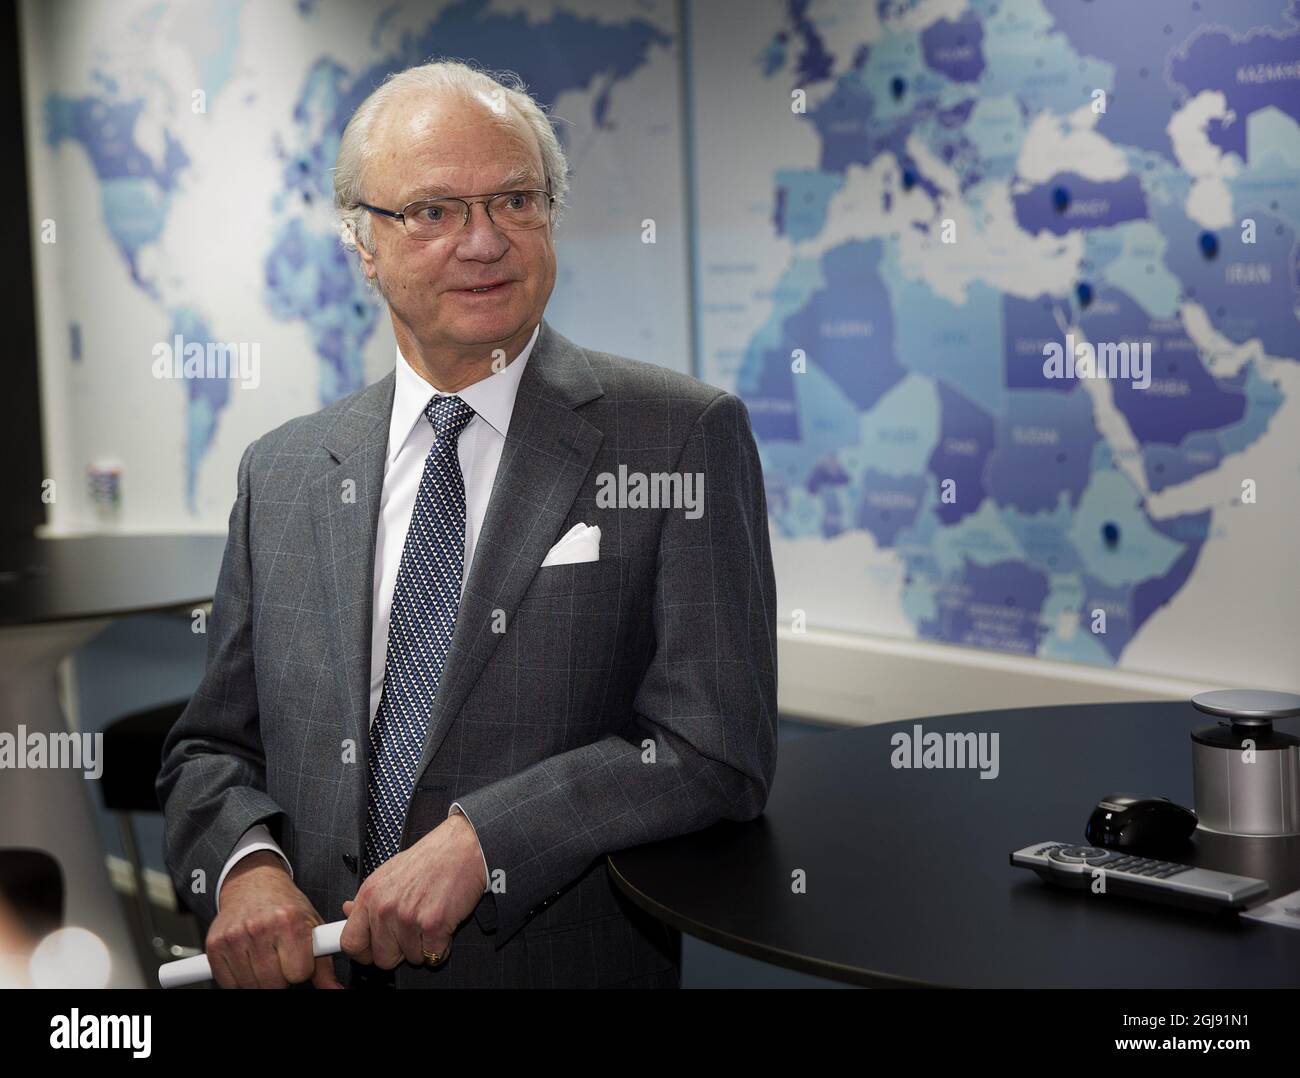 NORRKOPING 2015-02-20 King Carl Gustaf is seen during his visit to Â“The Migration BoardÂ” of Sweden in Norrkoping, Sweden, February 20, 2015. The Migration Board handles application for immigration to Sweden. Foto: Stefan Jerrevang / TT / Kod 60160  Stock Photo